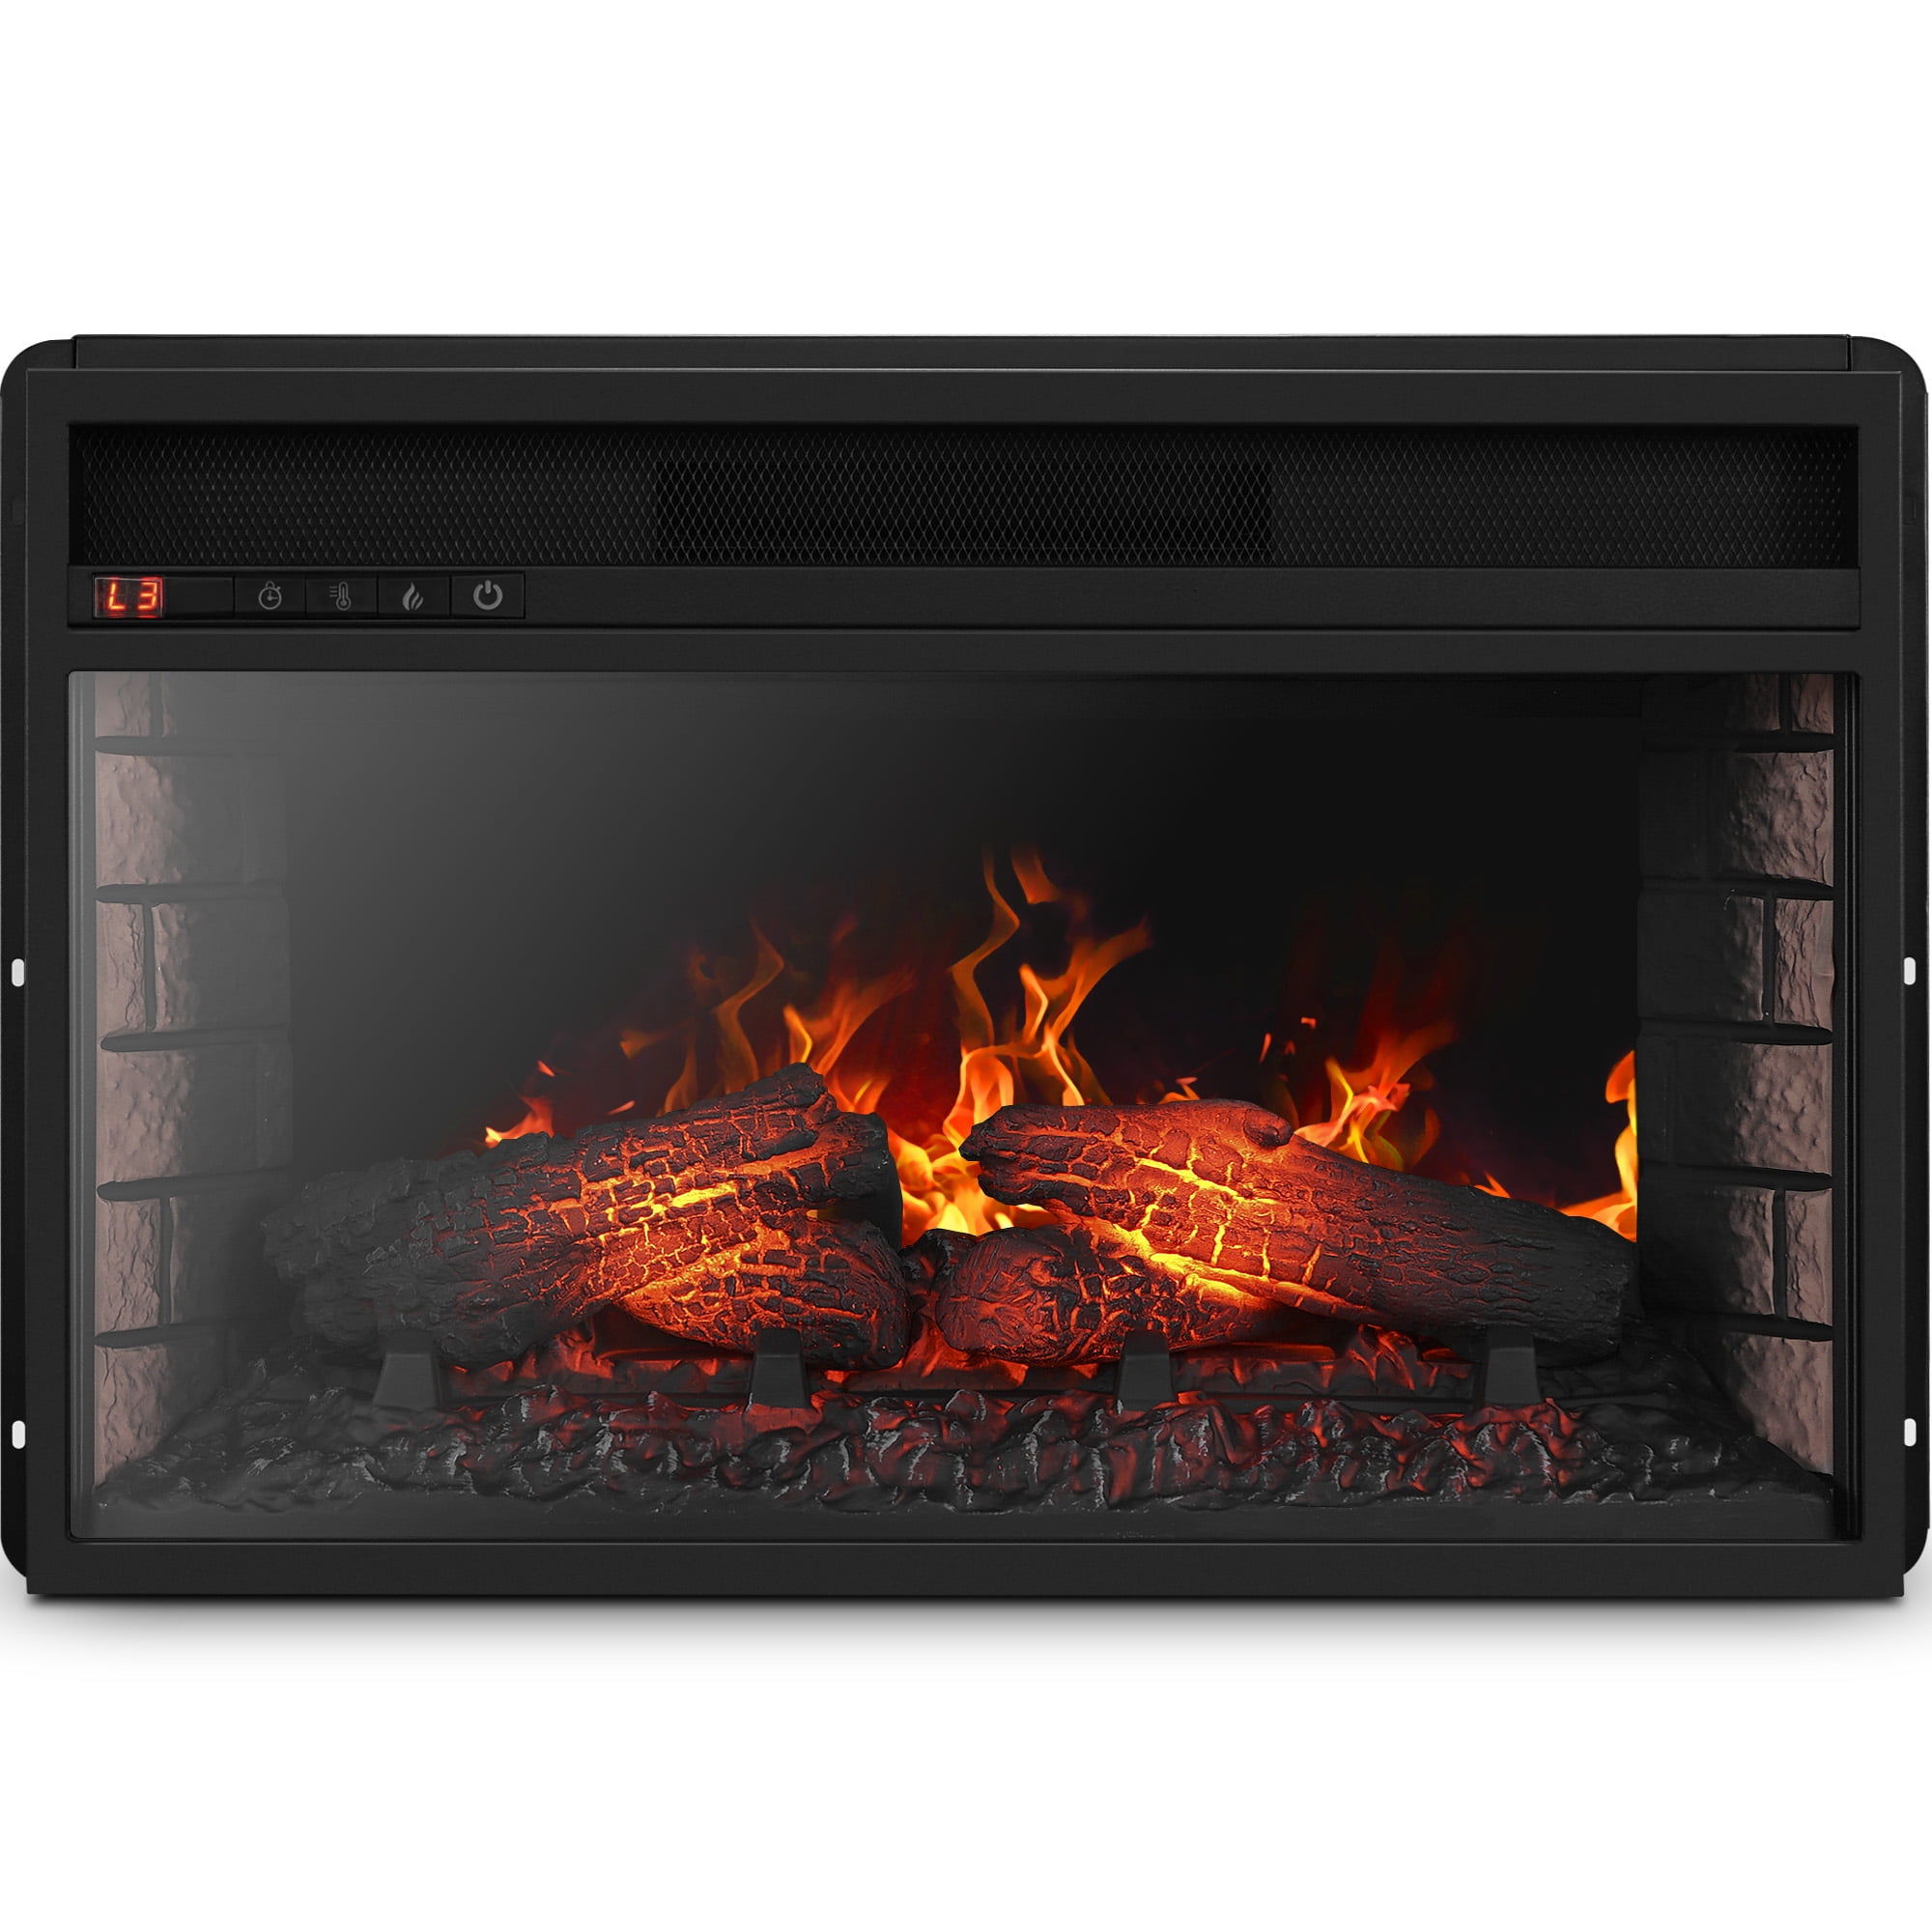 Belleze 26 Electric Fireplace Insert, Electric Fireplace Insert With Sound